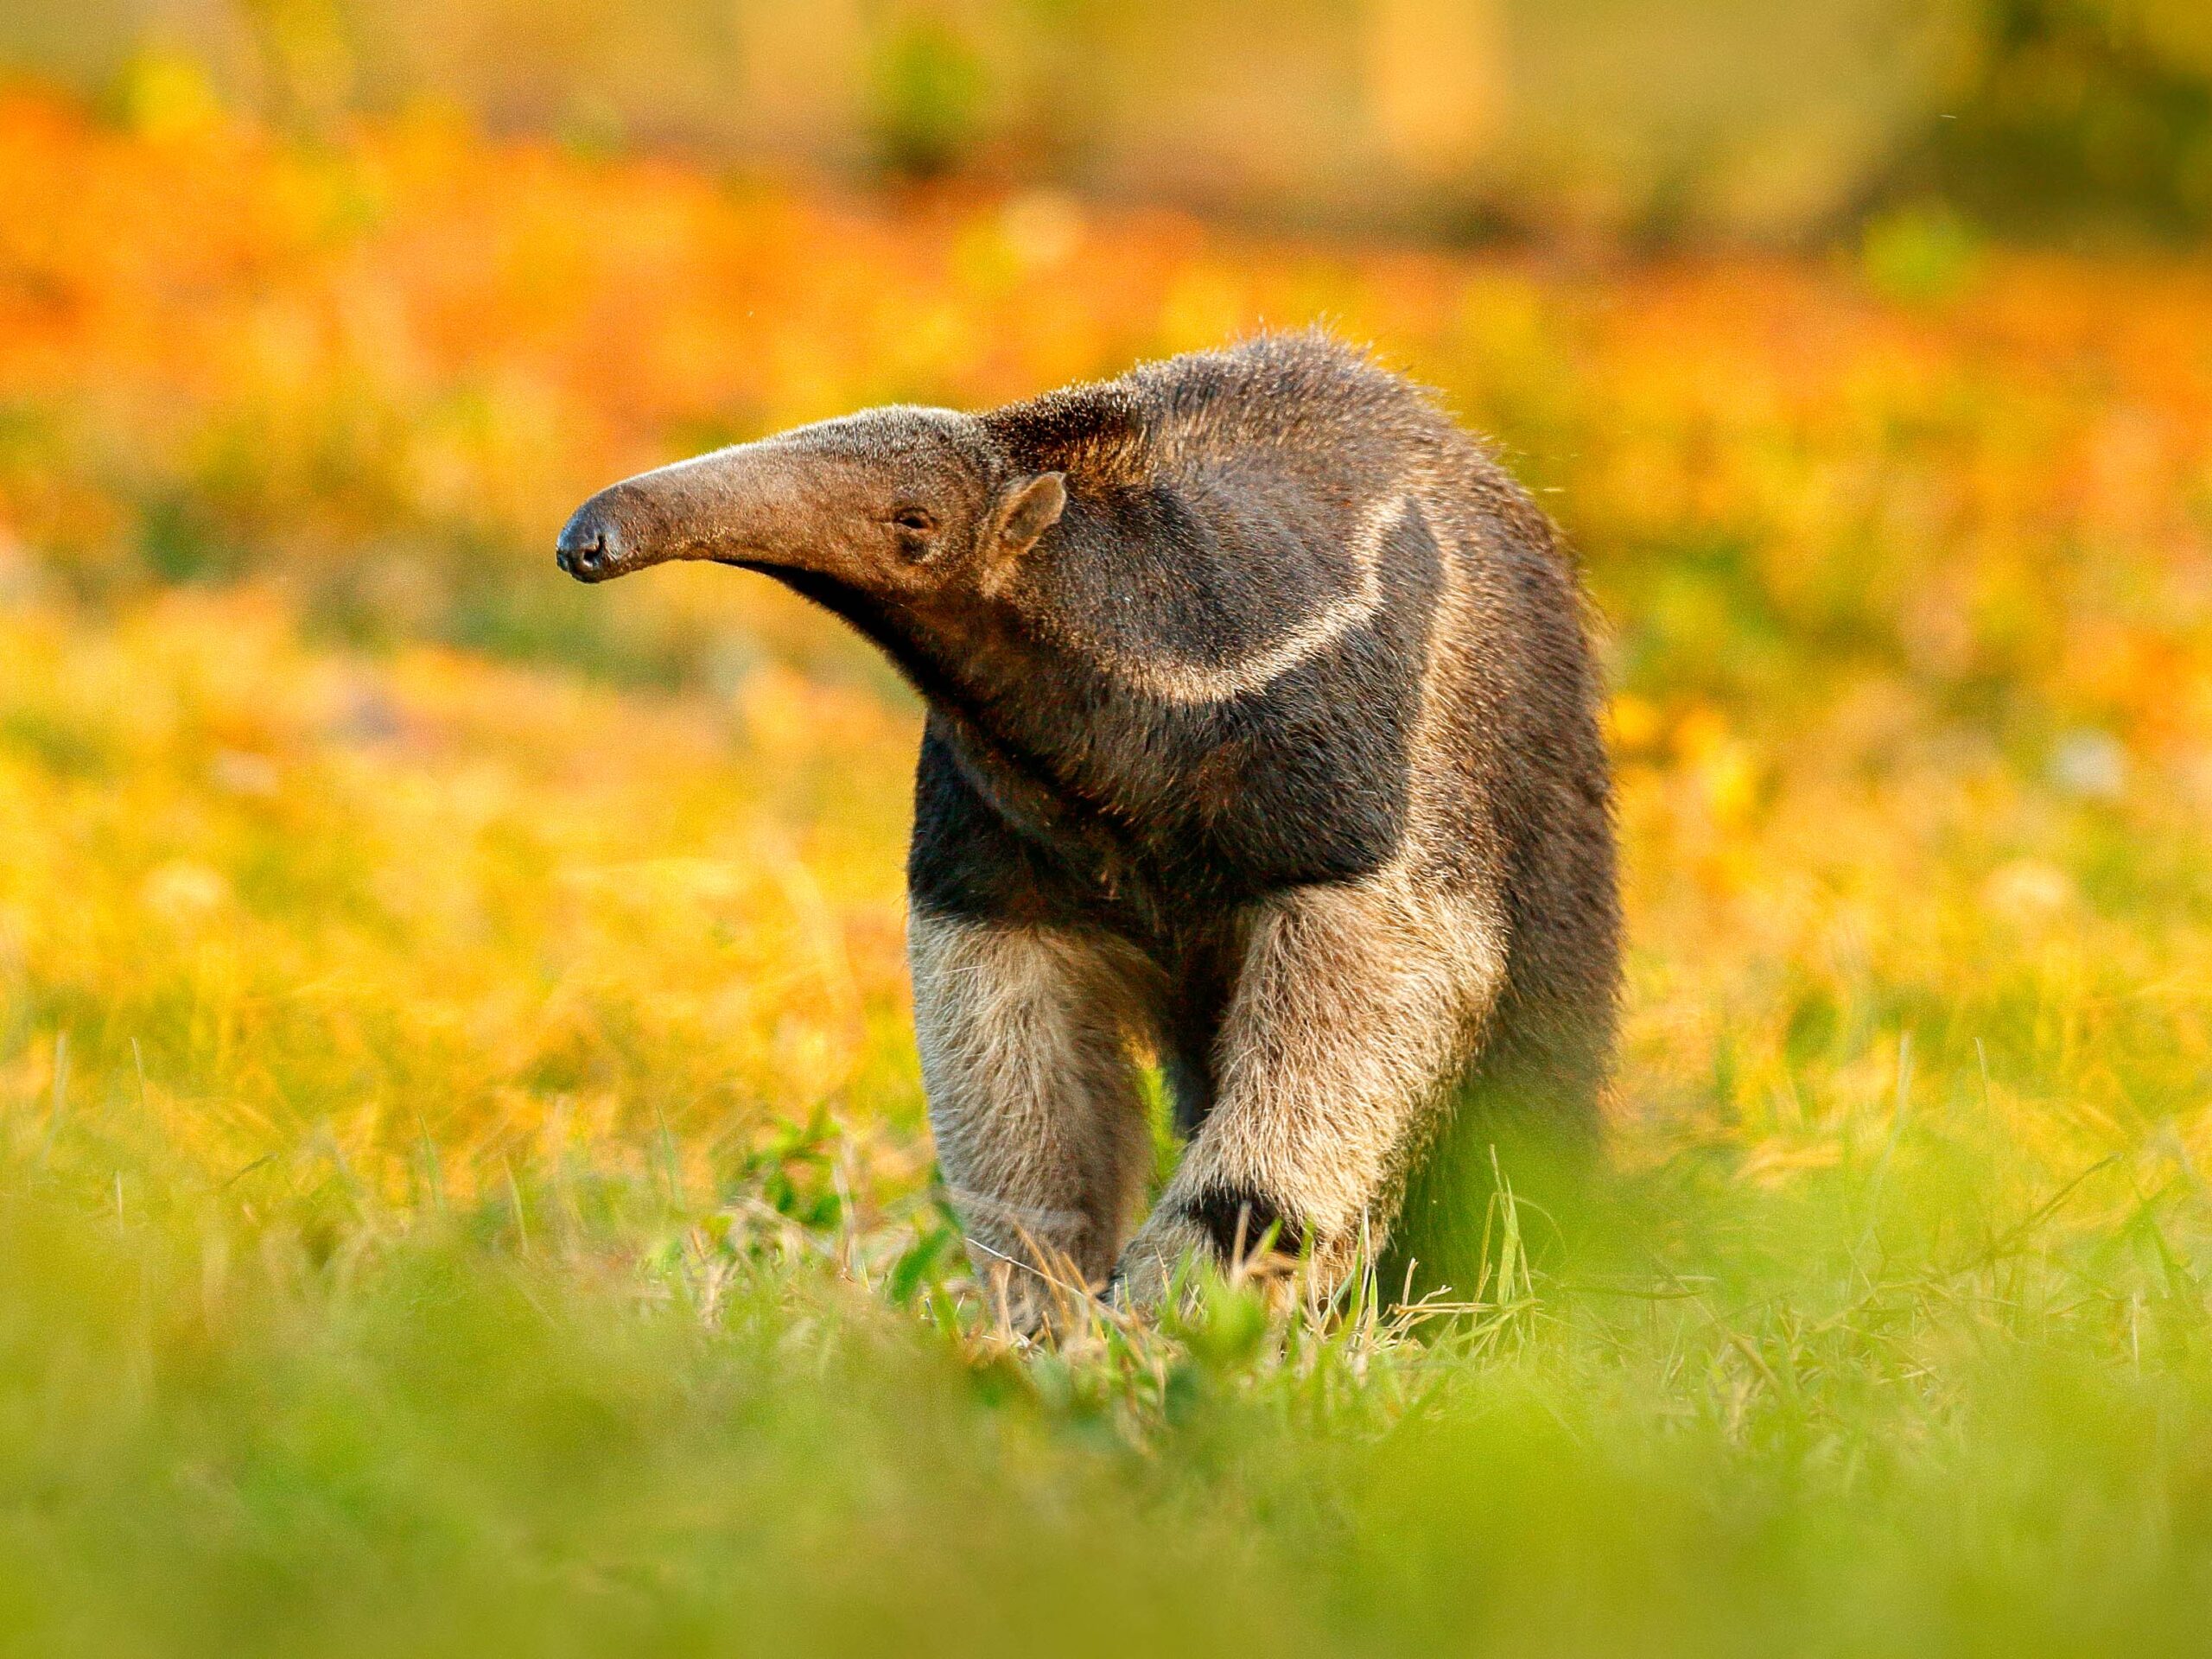 Giant Anteater in the Pantanal.